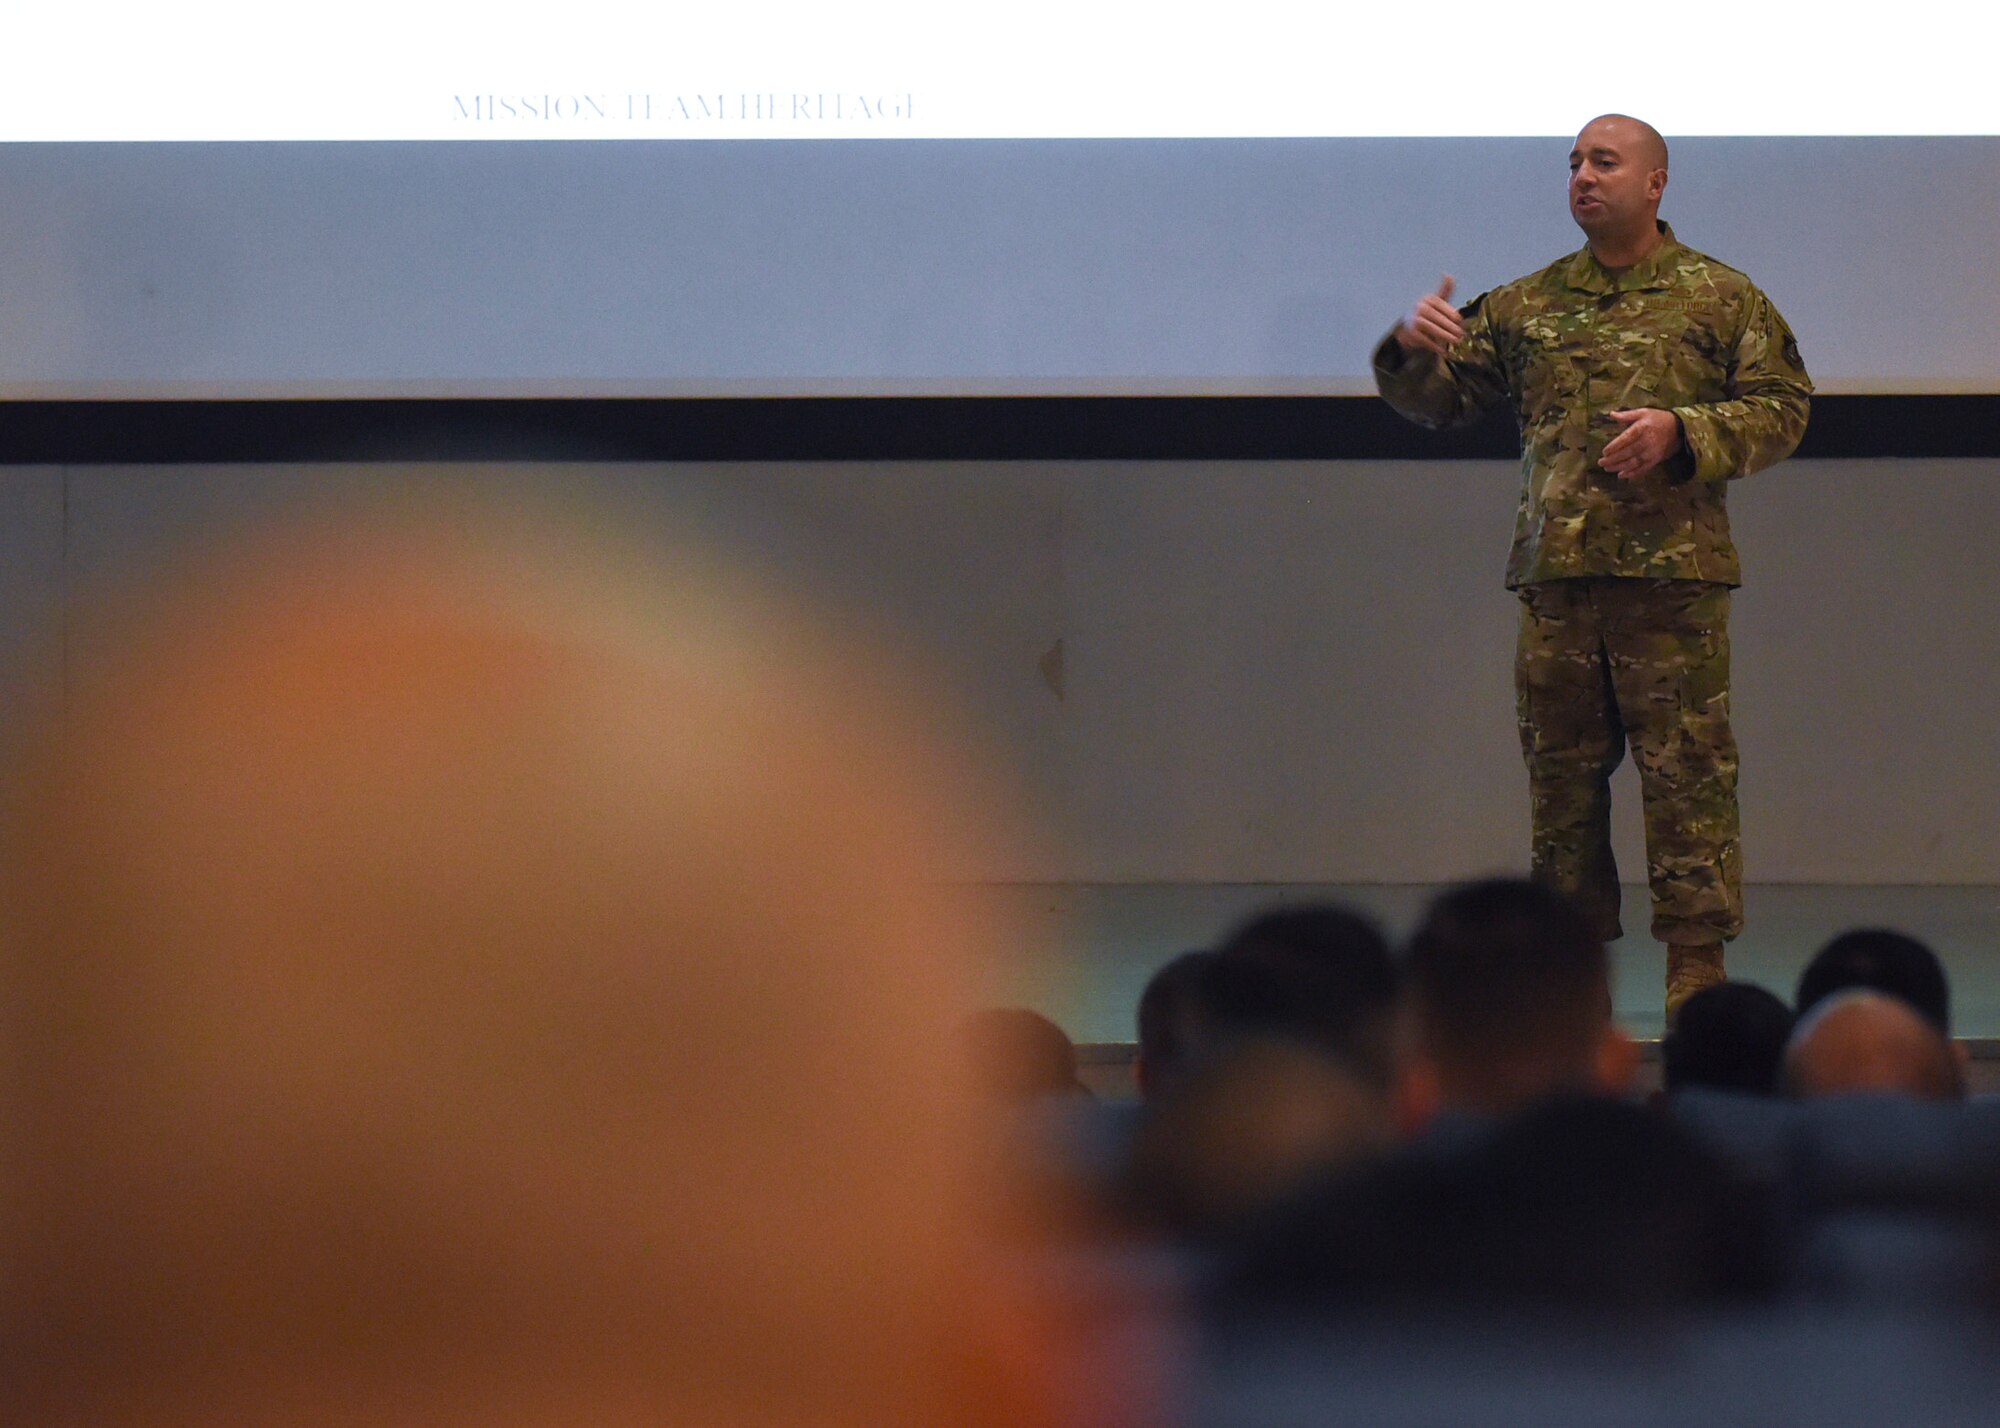 Chief Master Sgt. Steve Cenov, 8th Fighter Wing command chief, speaks to Wolf Pack members about multi-domain operations at Kunsan Air Base, Republic of Korea, Oct. 25, 2019. Multi-domain operations include not only being able to fight on land, in the air and at sea but also in space and cyberspace. (U.S. Air Force photo by Staff Sgt. Anthony Hetlage)